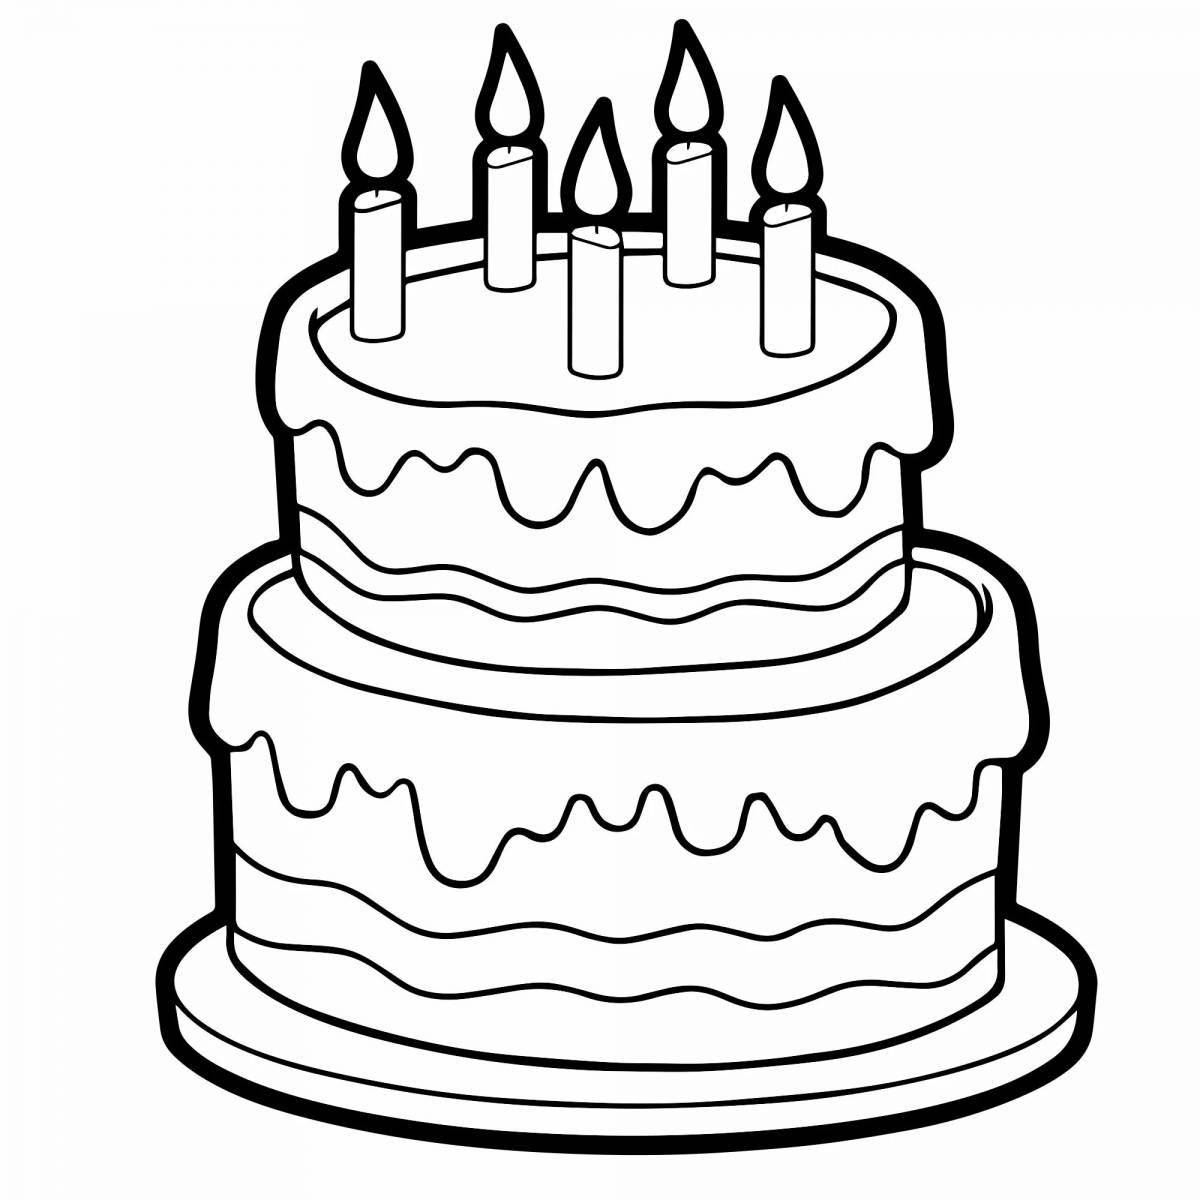 Exciting cake coloring pages for 5-6 year olds